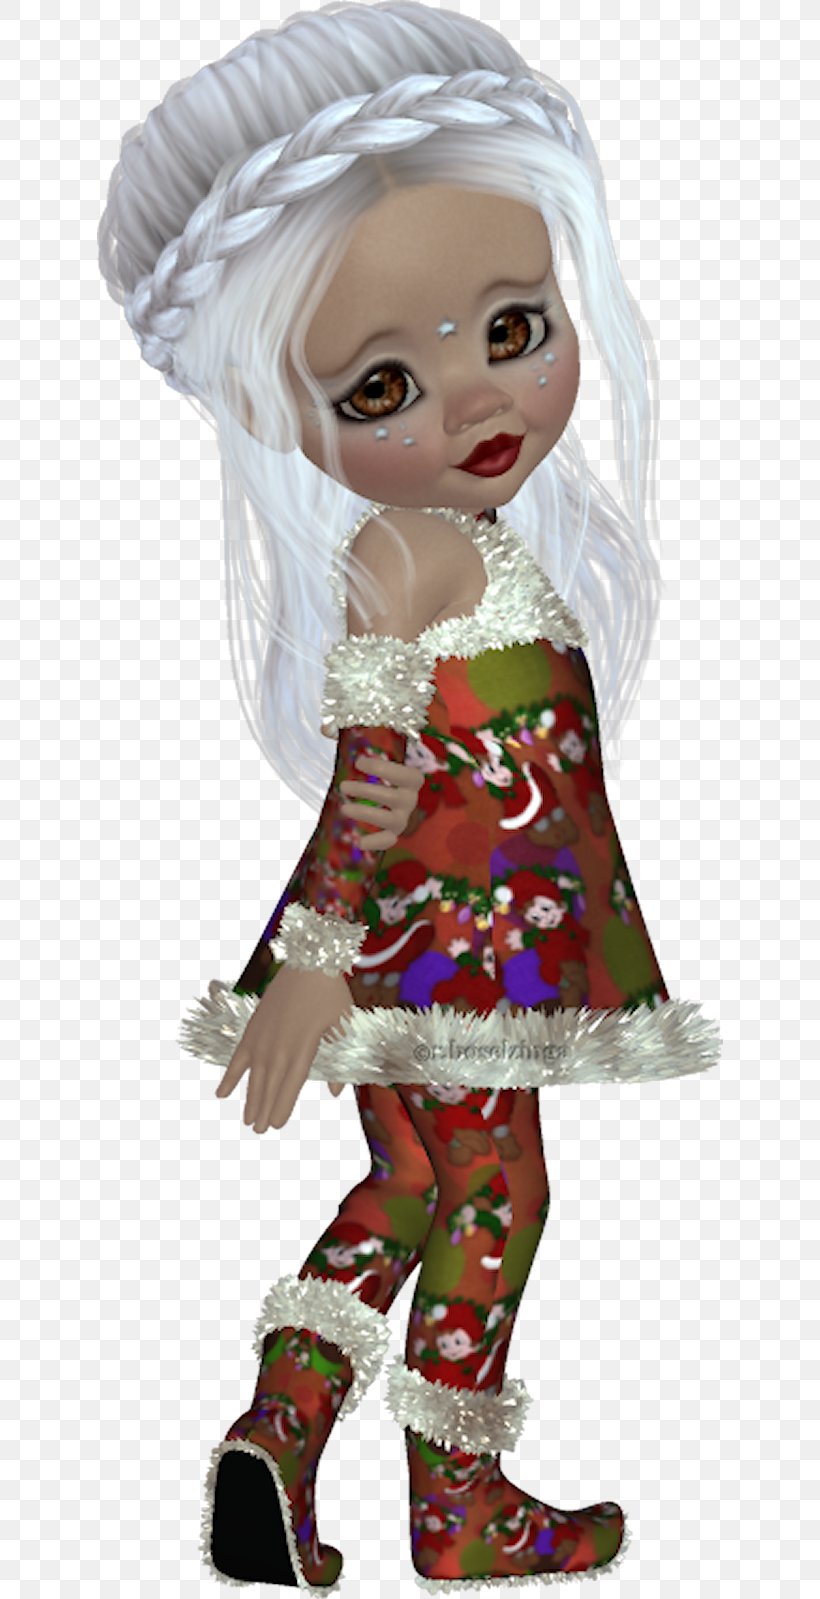 Doll Image Dog Desktop Wallpaper, PNG, 626x1599px, Doll, Blog, Character, Christmas, Christmas Day Download Free